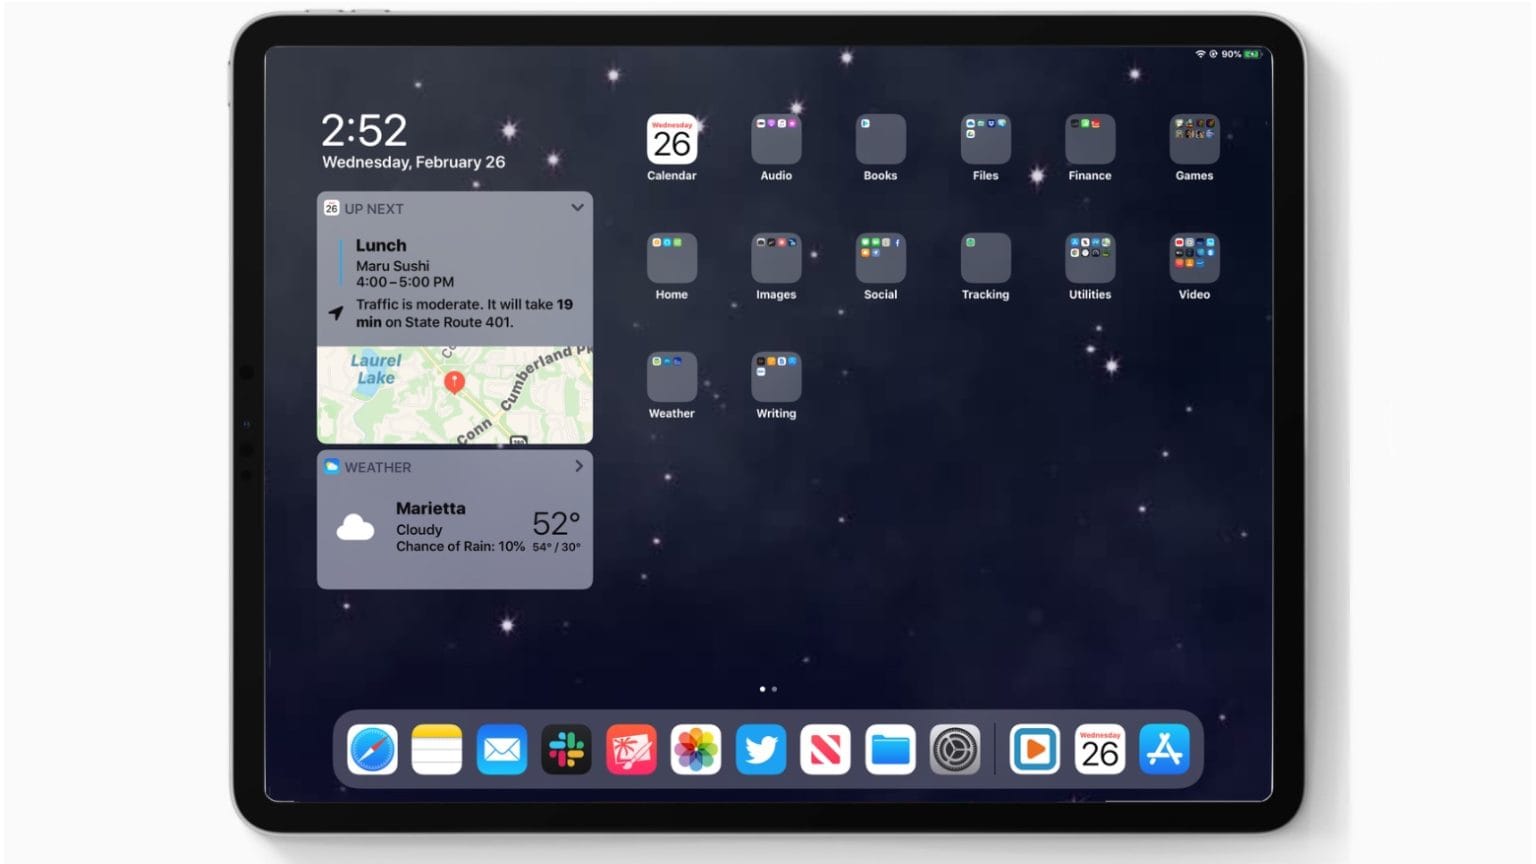 iPadOS 13.4 includes an improved Up Next home screen widget.